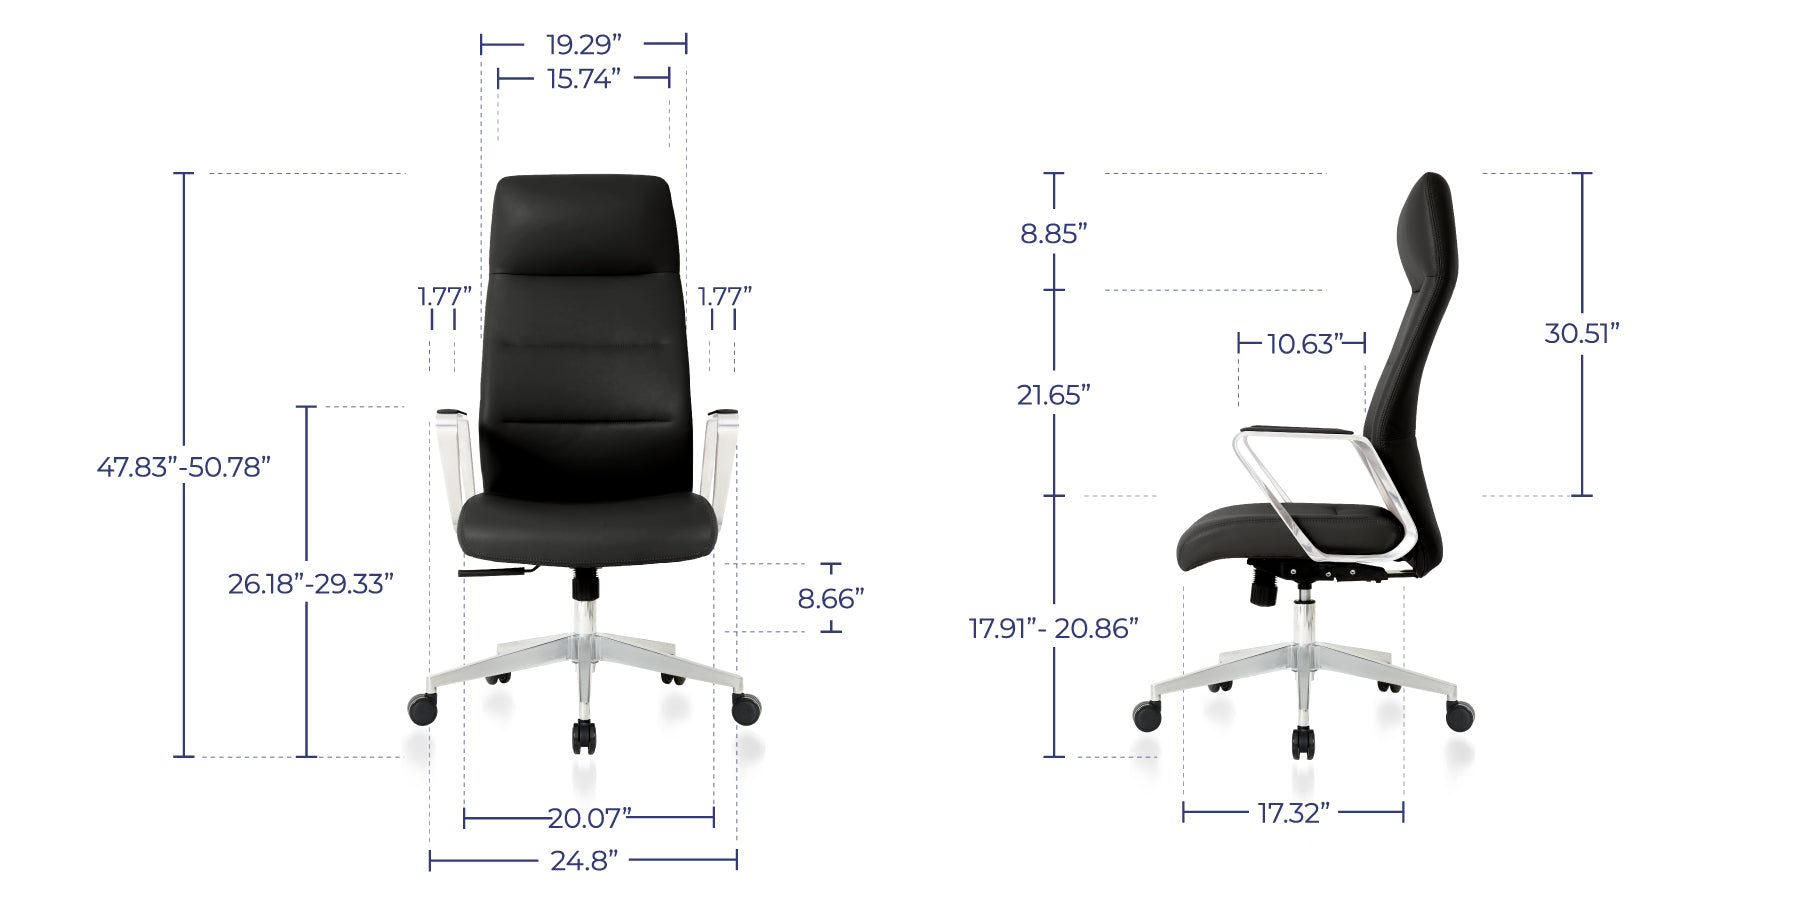 Dimensions of the Schedule - Office Chair